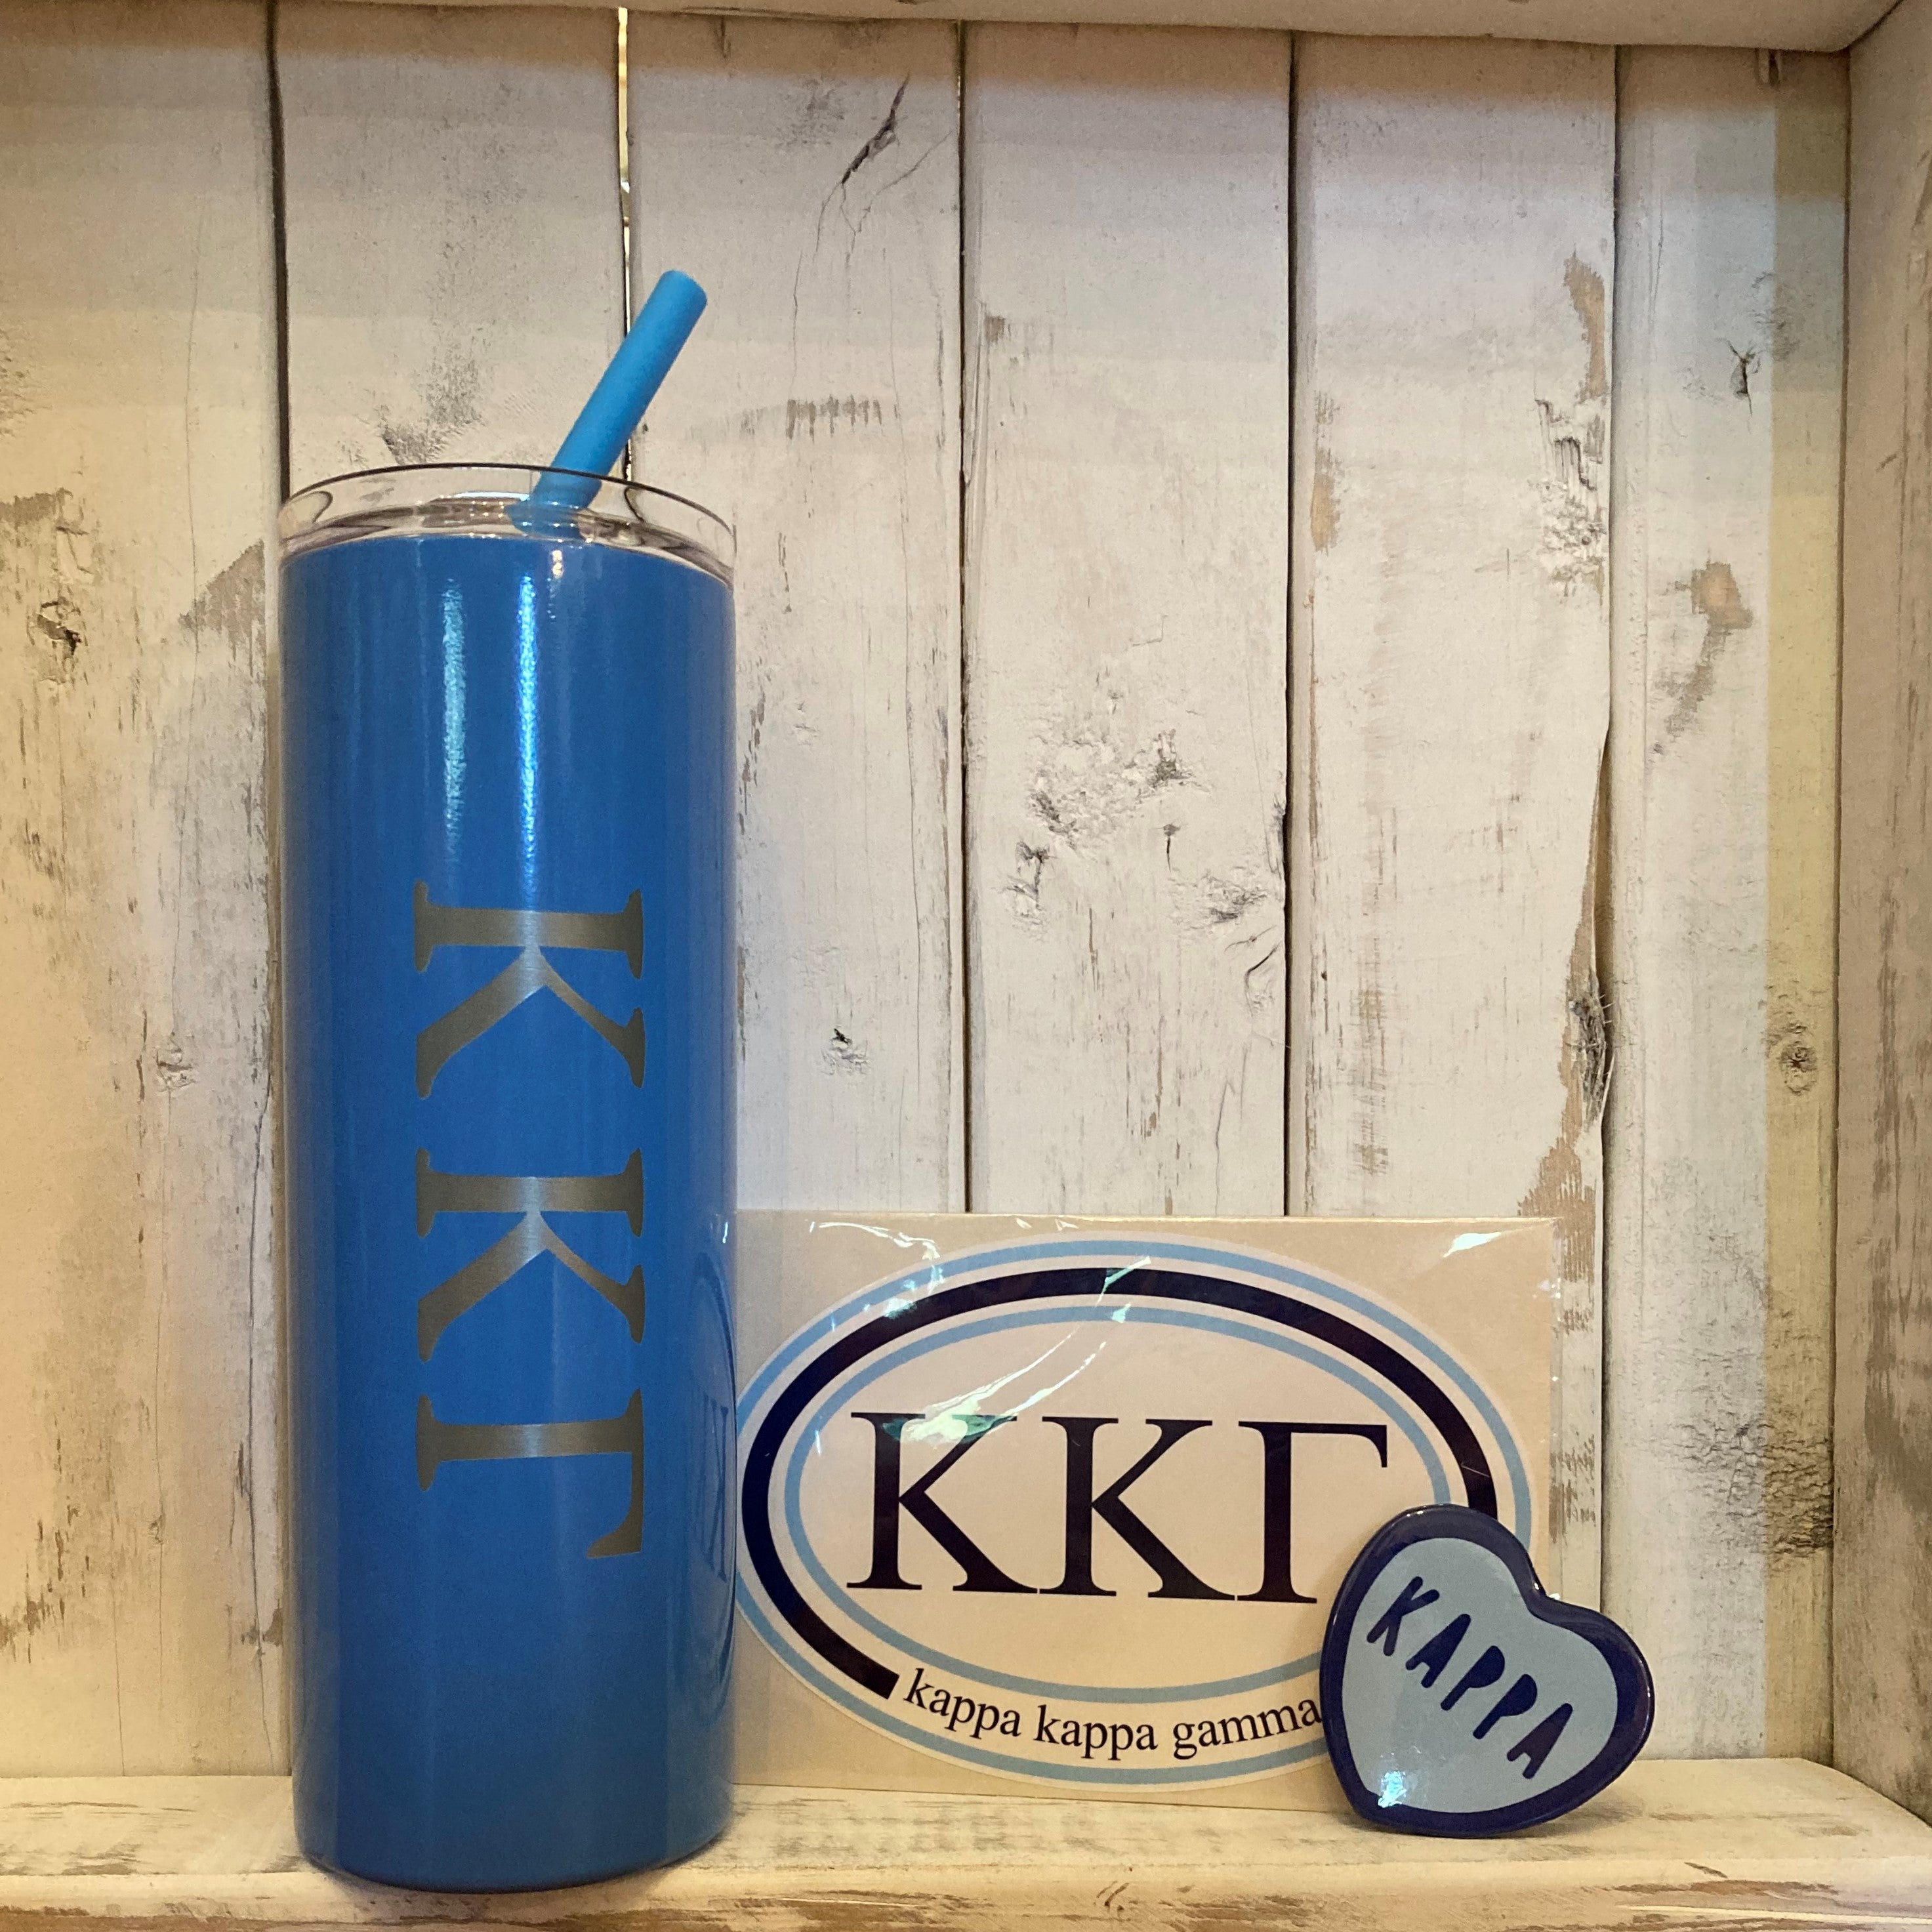 Stay hydrated in style with our Engraved Sorority Skinny Tumblers (Skinnies). These powder-coated tumblers are made from stainless steel for durability and performance and are BPA-free. Choose from a variety of vibrant colors and impress your friends with personalized engravings. Plus, stay cool with a matching straw included with every tumbler! Refresh in style - get your Skinnies today!